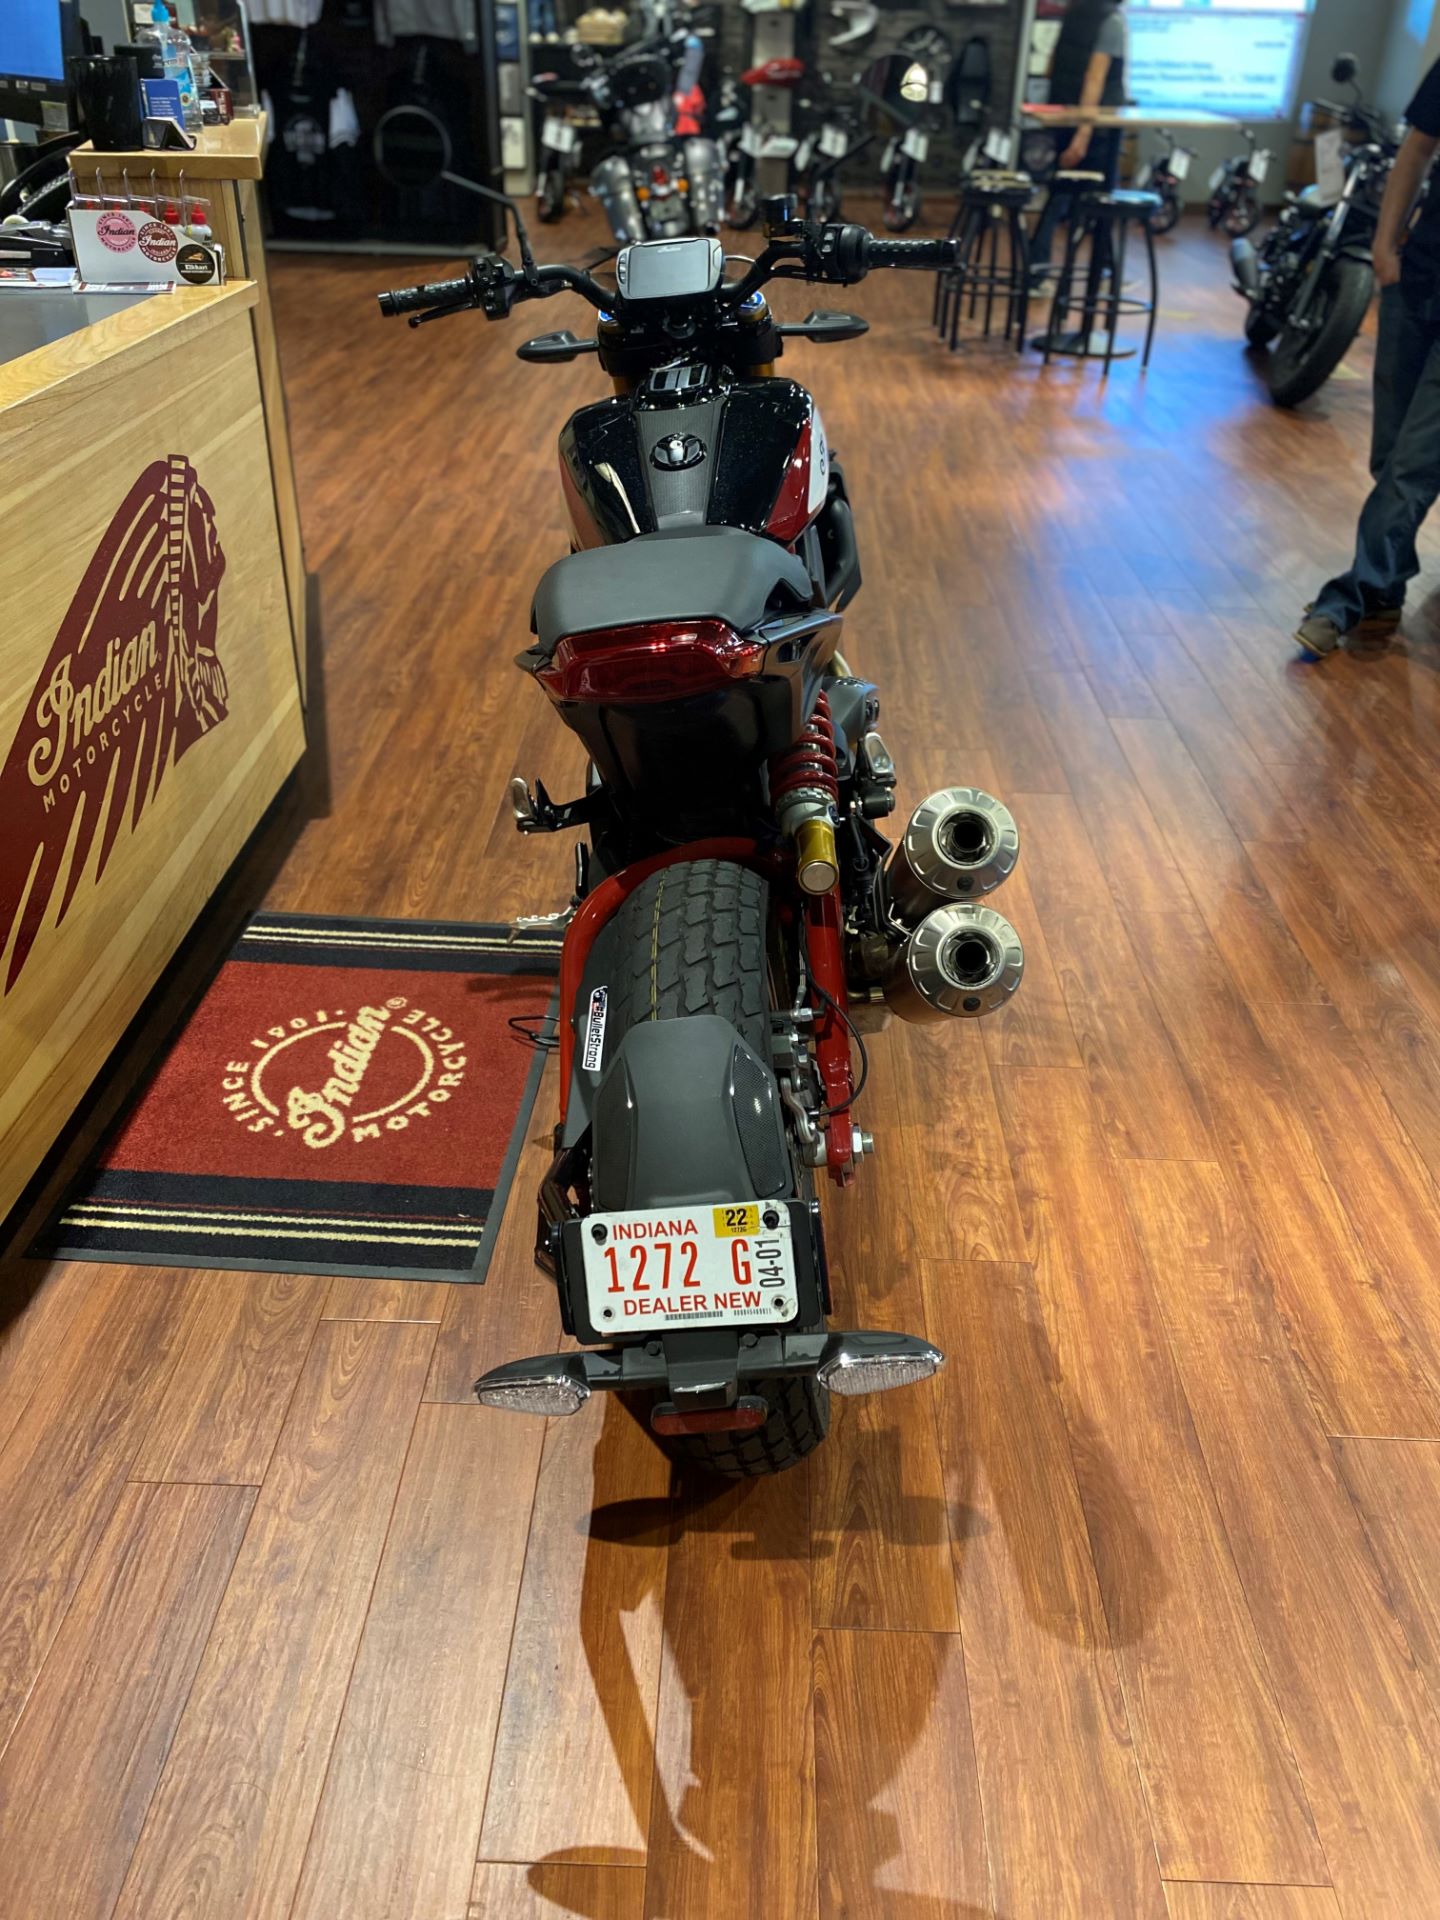 2019 Indian FTR™ 1200 S in Elkhart, Indiana - Photo 4